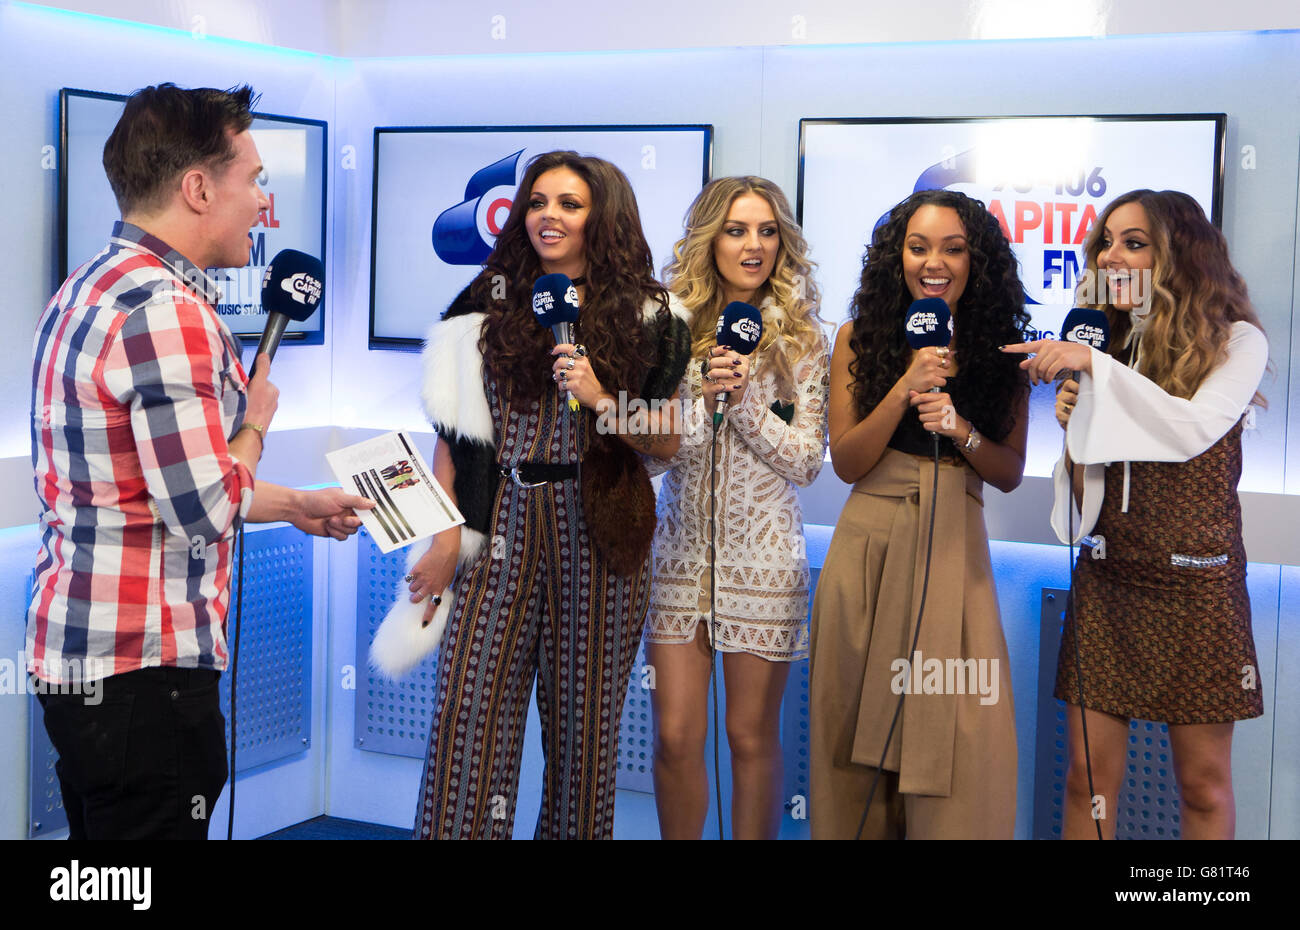 Capital FM presenter Greg Burns and Jesy Nelson, Perrie Edwards, Leigh-Anne Pinnock and Jade Thirlwall from Little Mix during an interview at Capital FM Summertime Ball Radio studio, Wembley Stadium, London. Daniel Leal-Olivas/PA Showbiz Stock Photo